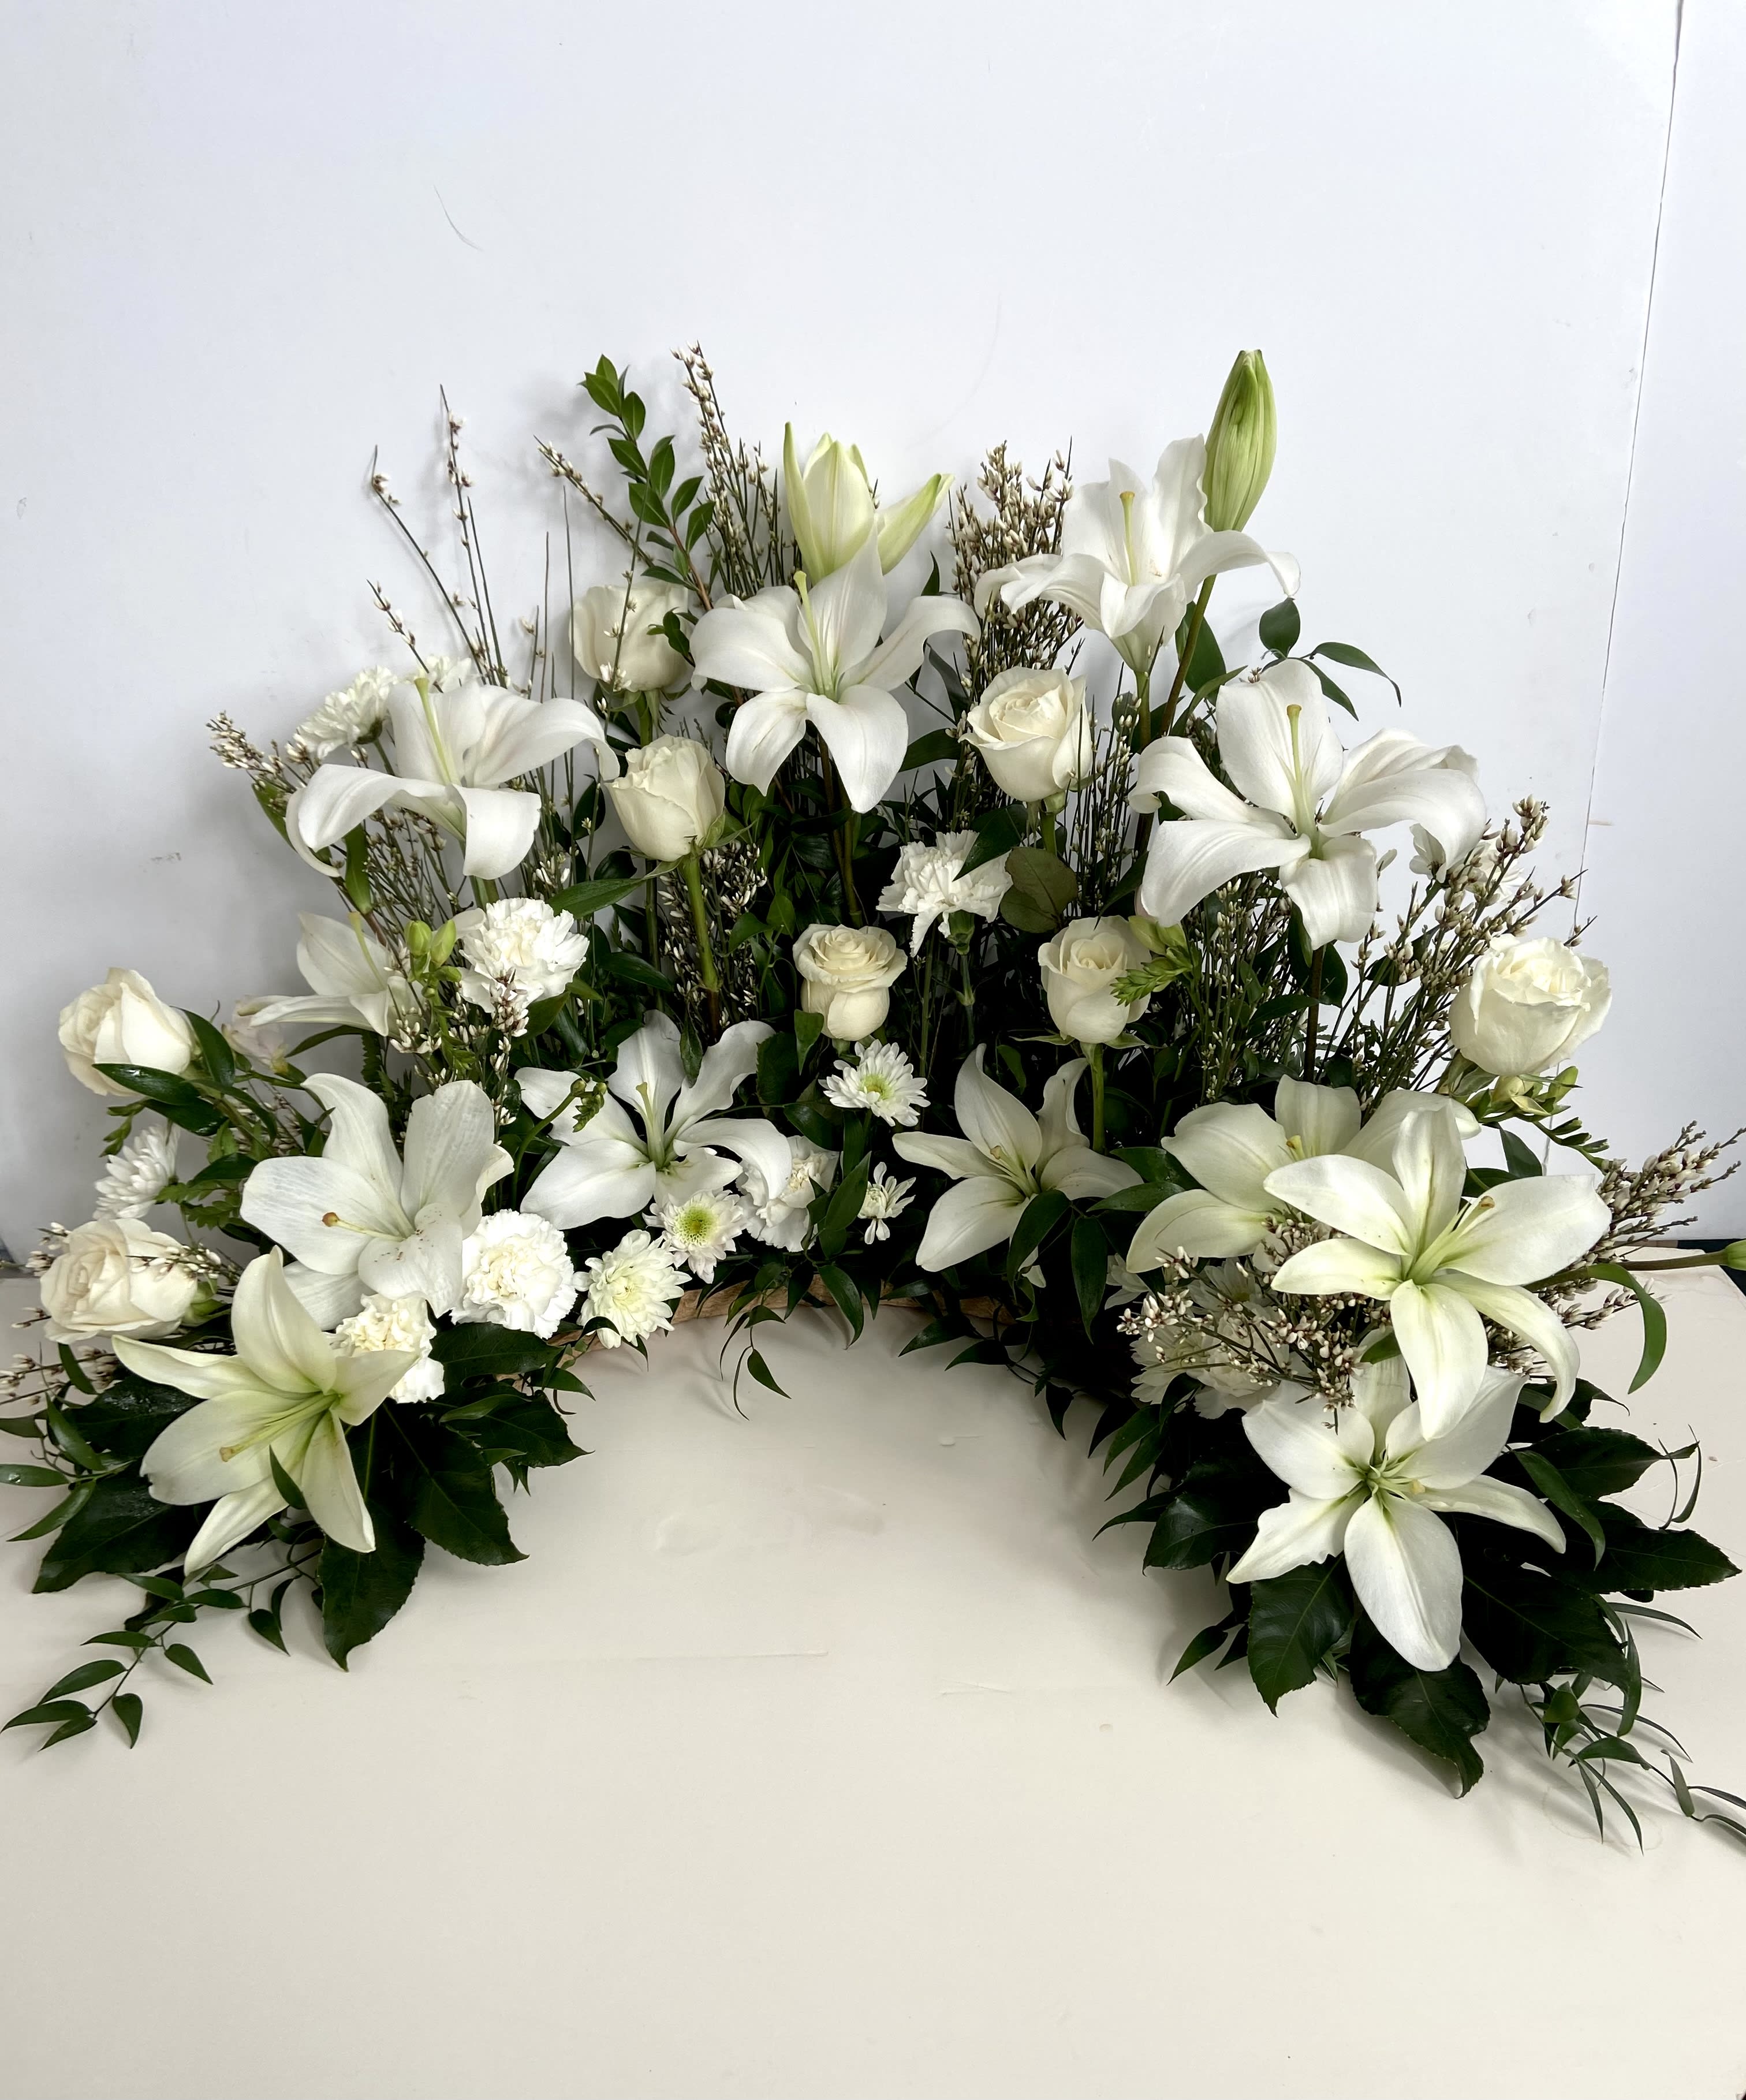 White Serenity  - Half circle memorial for urn or chest with white lilies, white roses, carnations, mums and genestre 